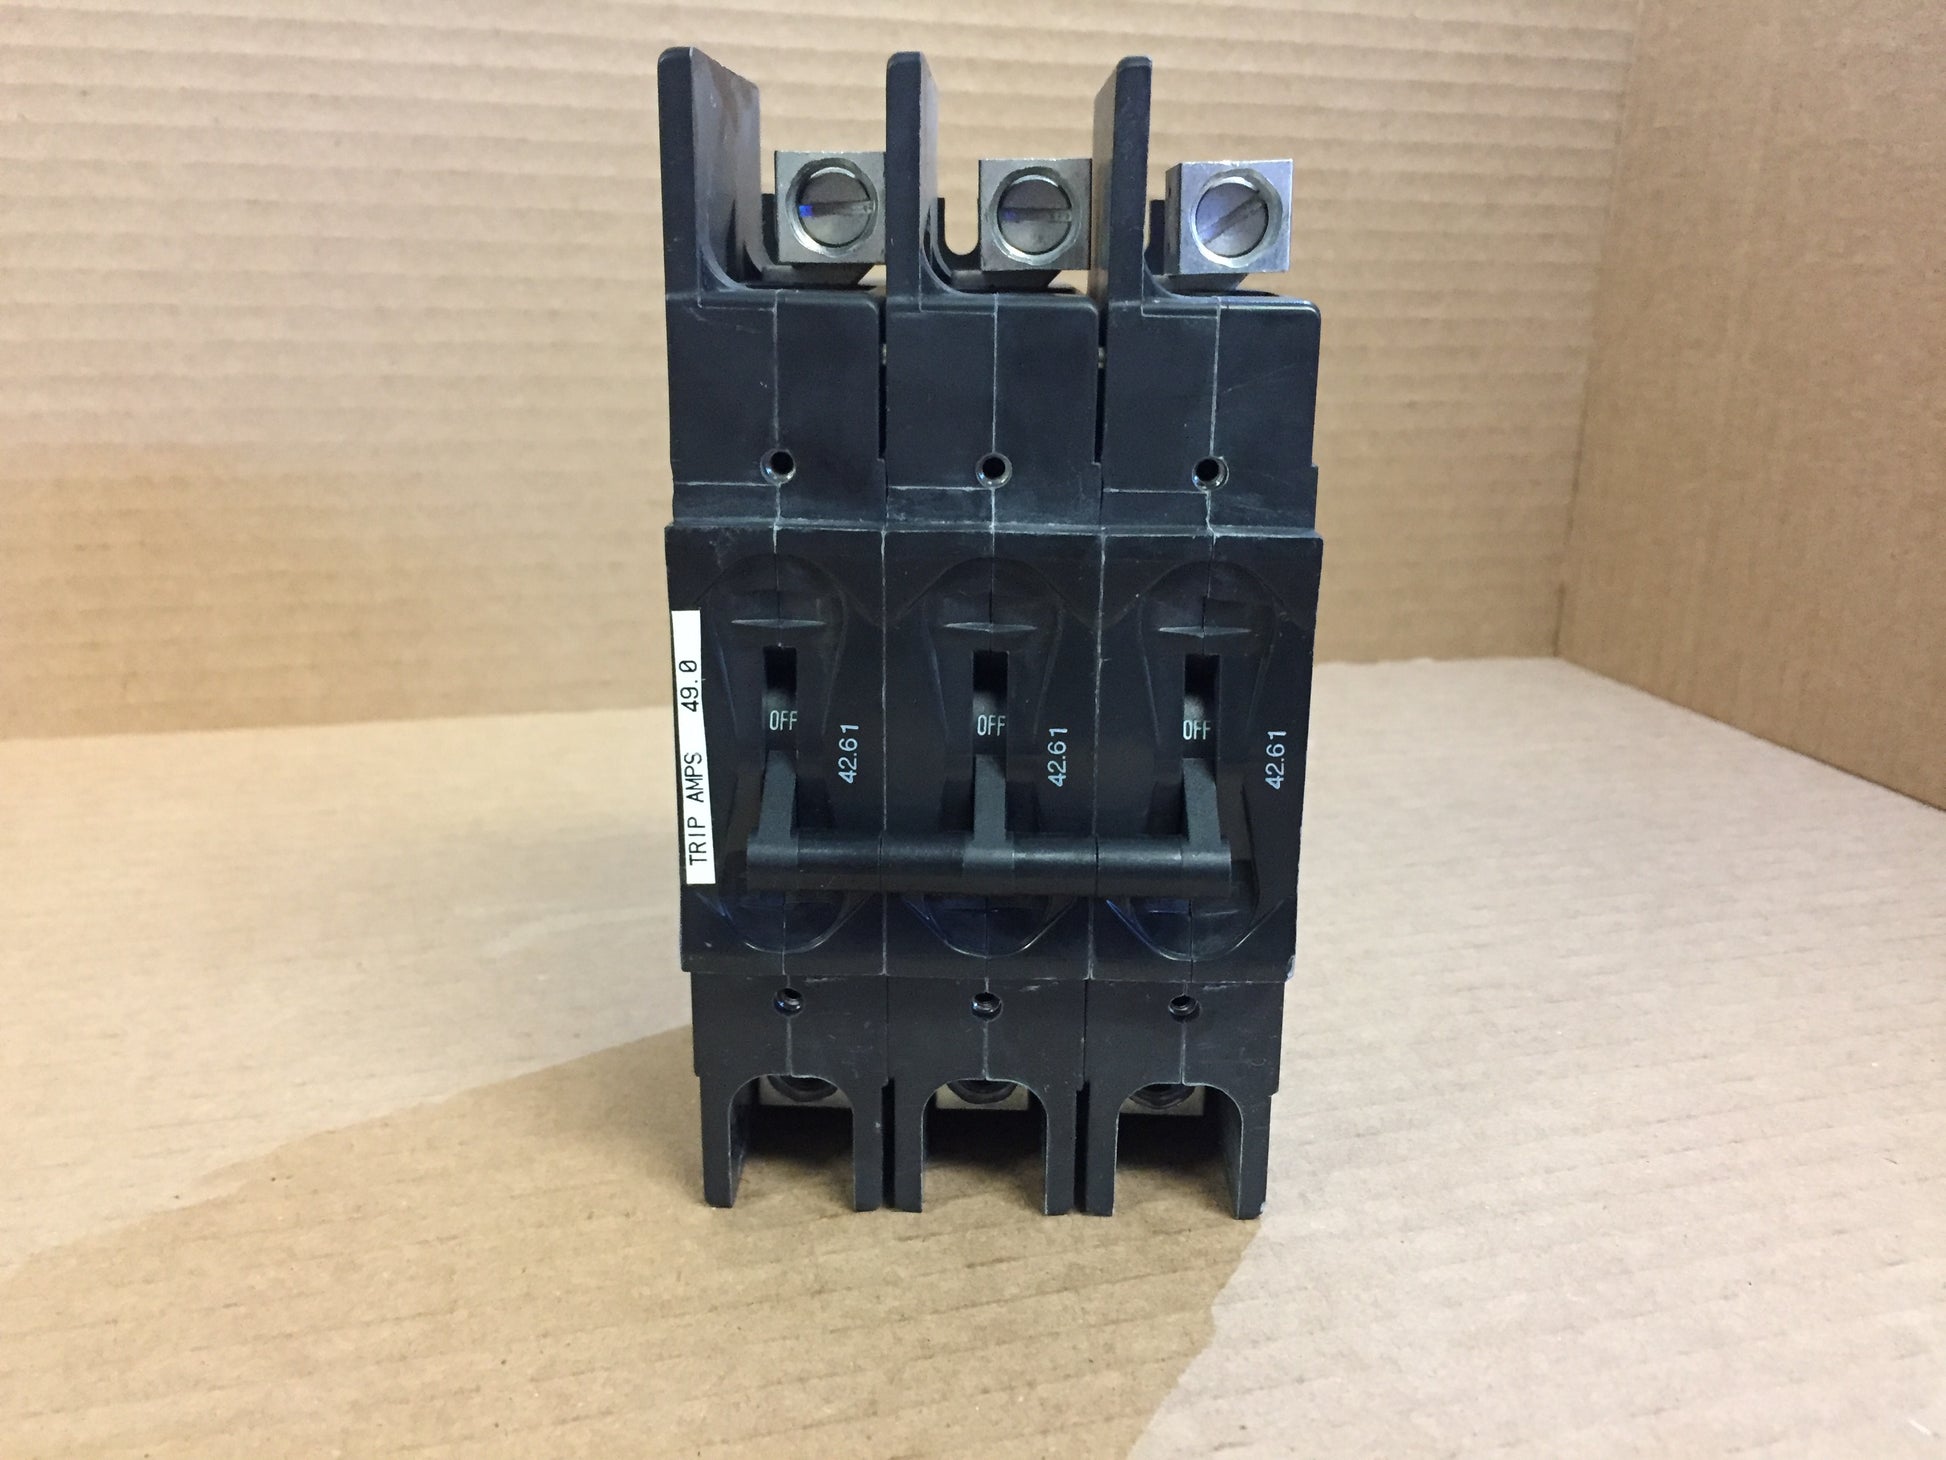 3 POLE 42.61 AMP, HYDRAULIC MAGNETIC CIRCUIT BREAKER PROTECTOR/FOR MANUAL CONTROLLER APPLICATIONS, MAX VOLTS:240, HZ:50/60, IN MFG. BOX, MADE IN MEXICO.